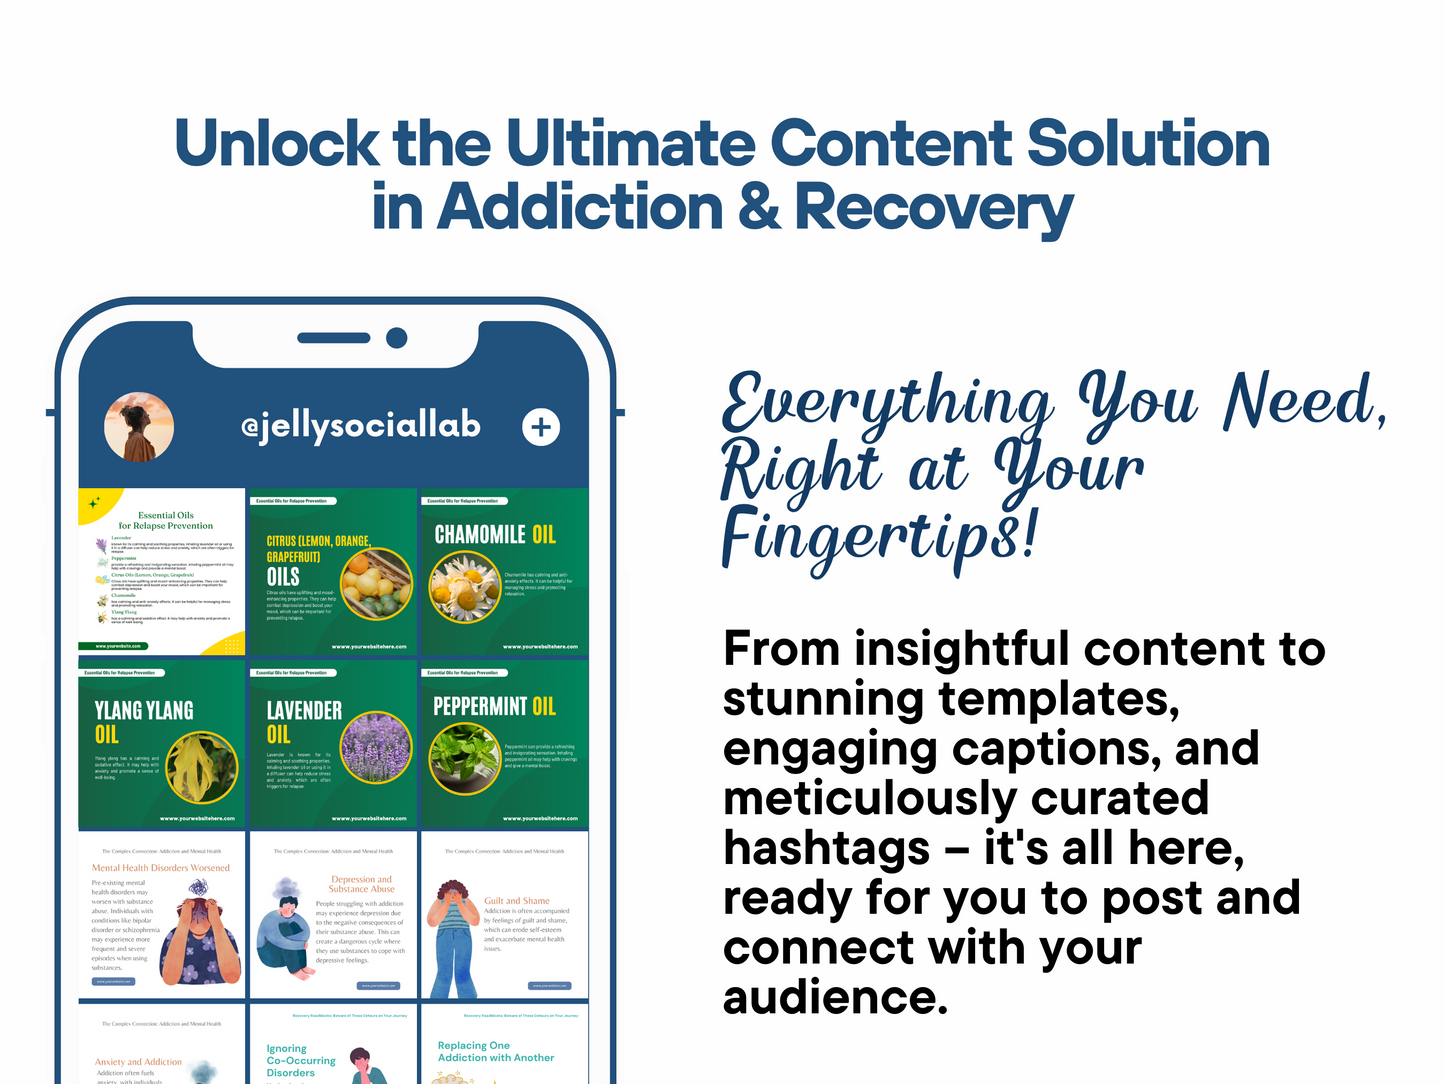 450+ Addiction Recovery Social Media Content Bundle